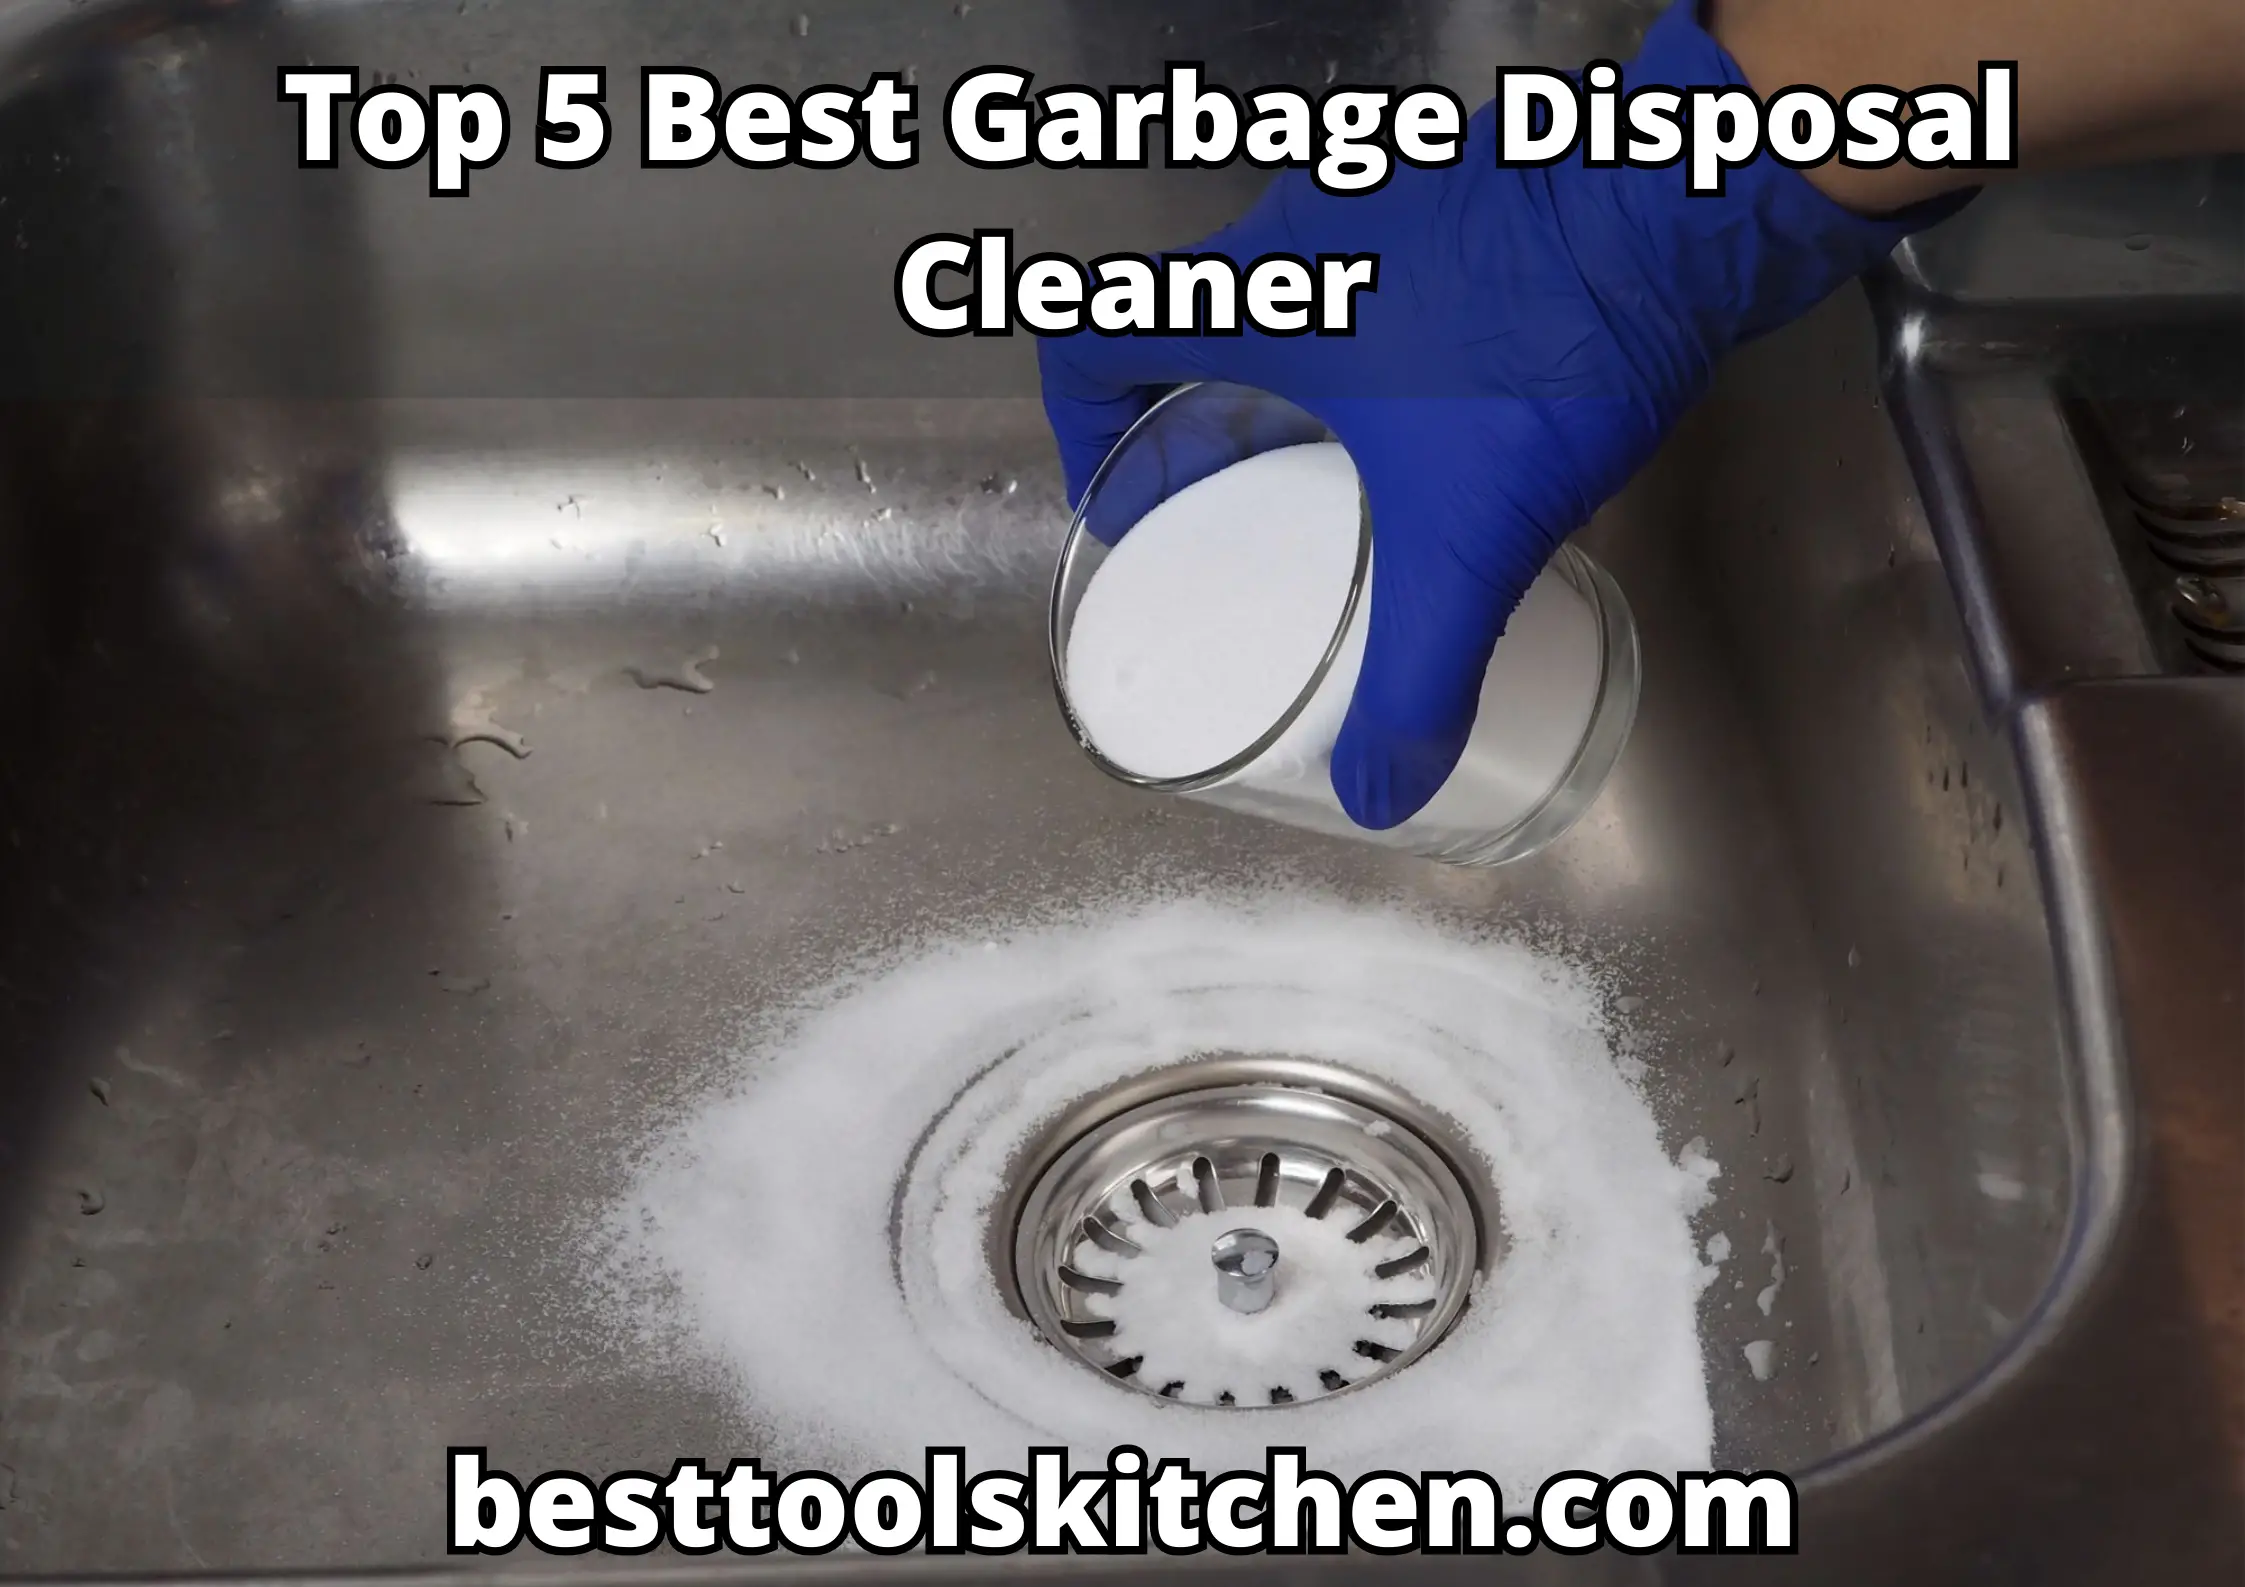 Best garbage disposal cleaner. Top 5 cleaners that clean everything